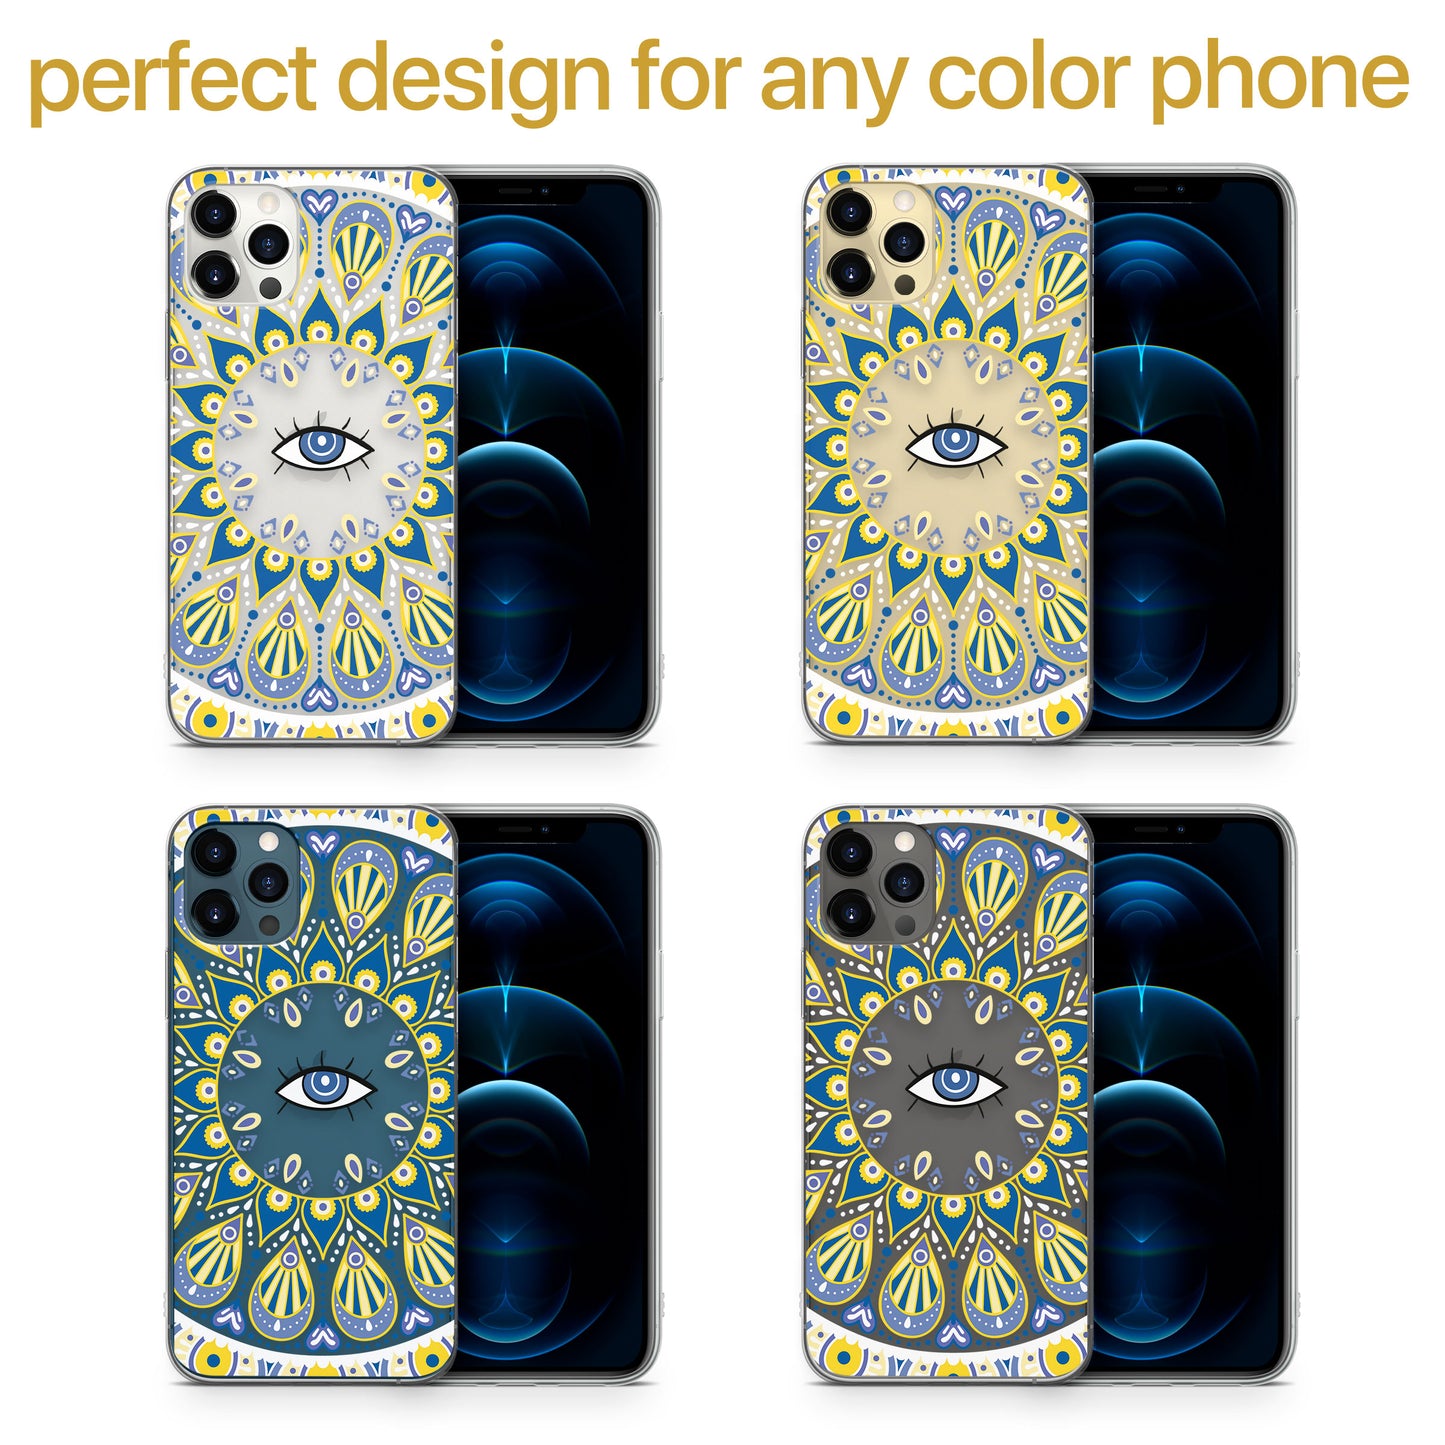 TPU Clear case with (Evil Eyes Sunny) Design for iPhone & Samsung Phones